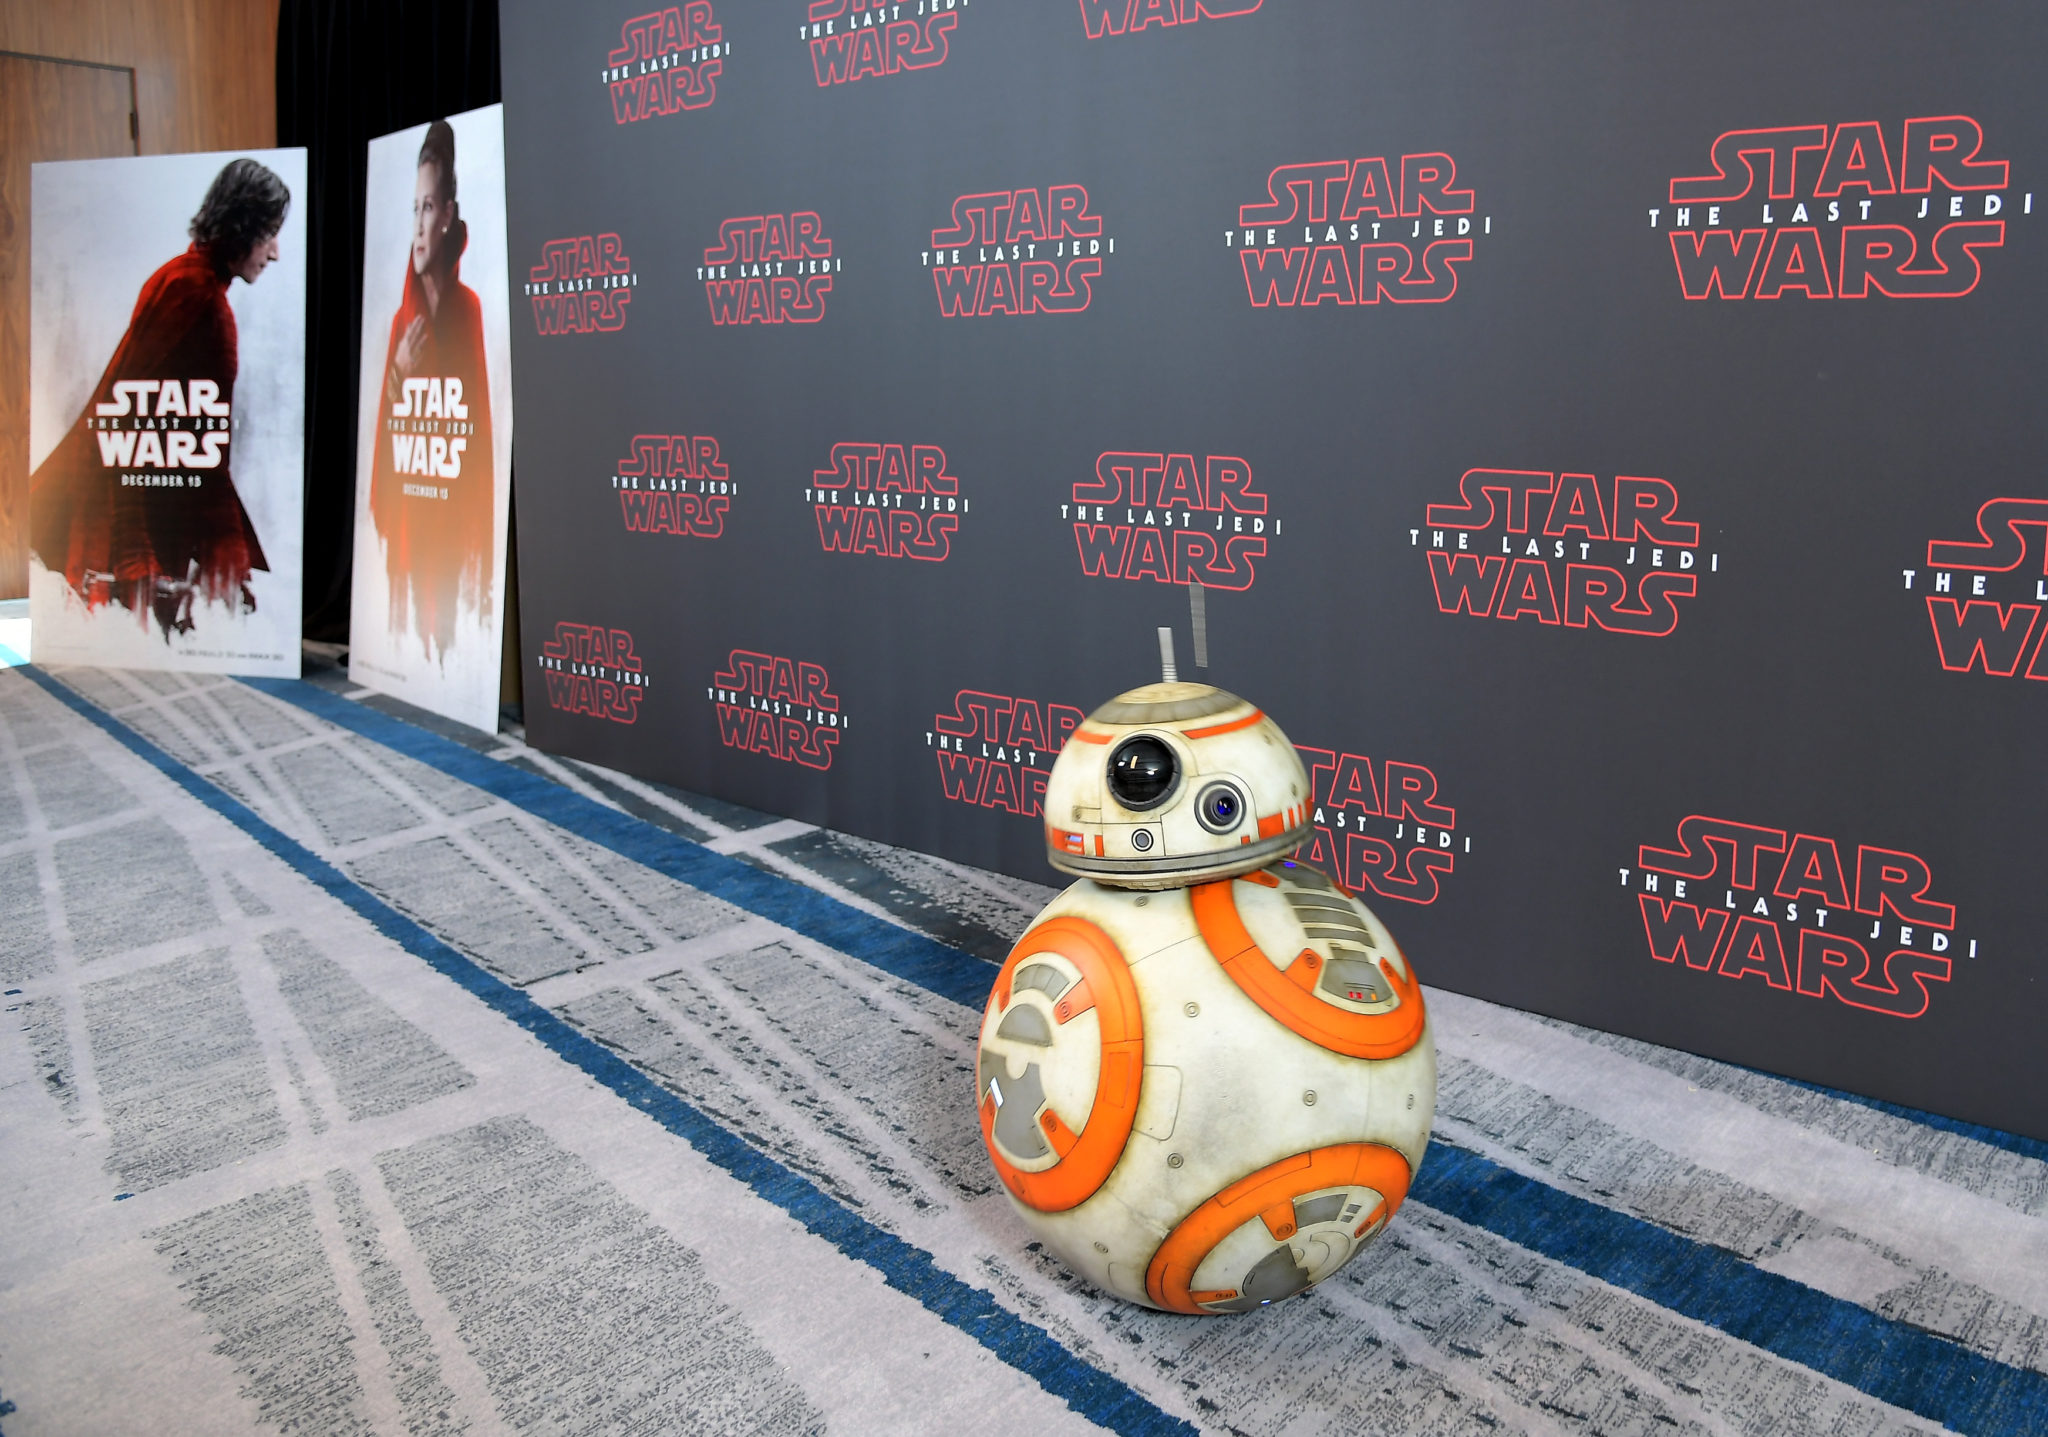 BB-8 will be a featured character in the new series!